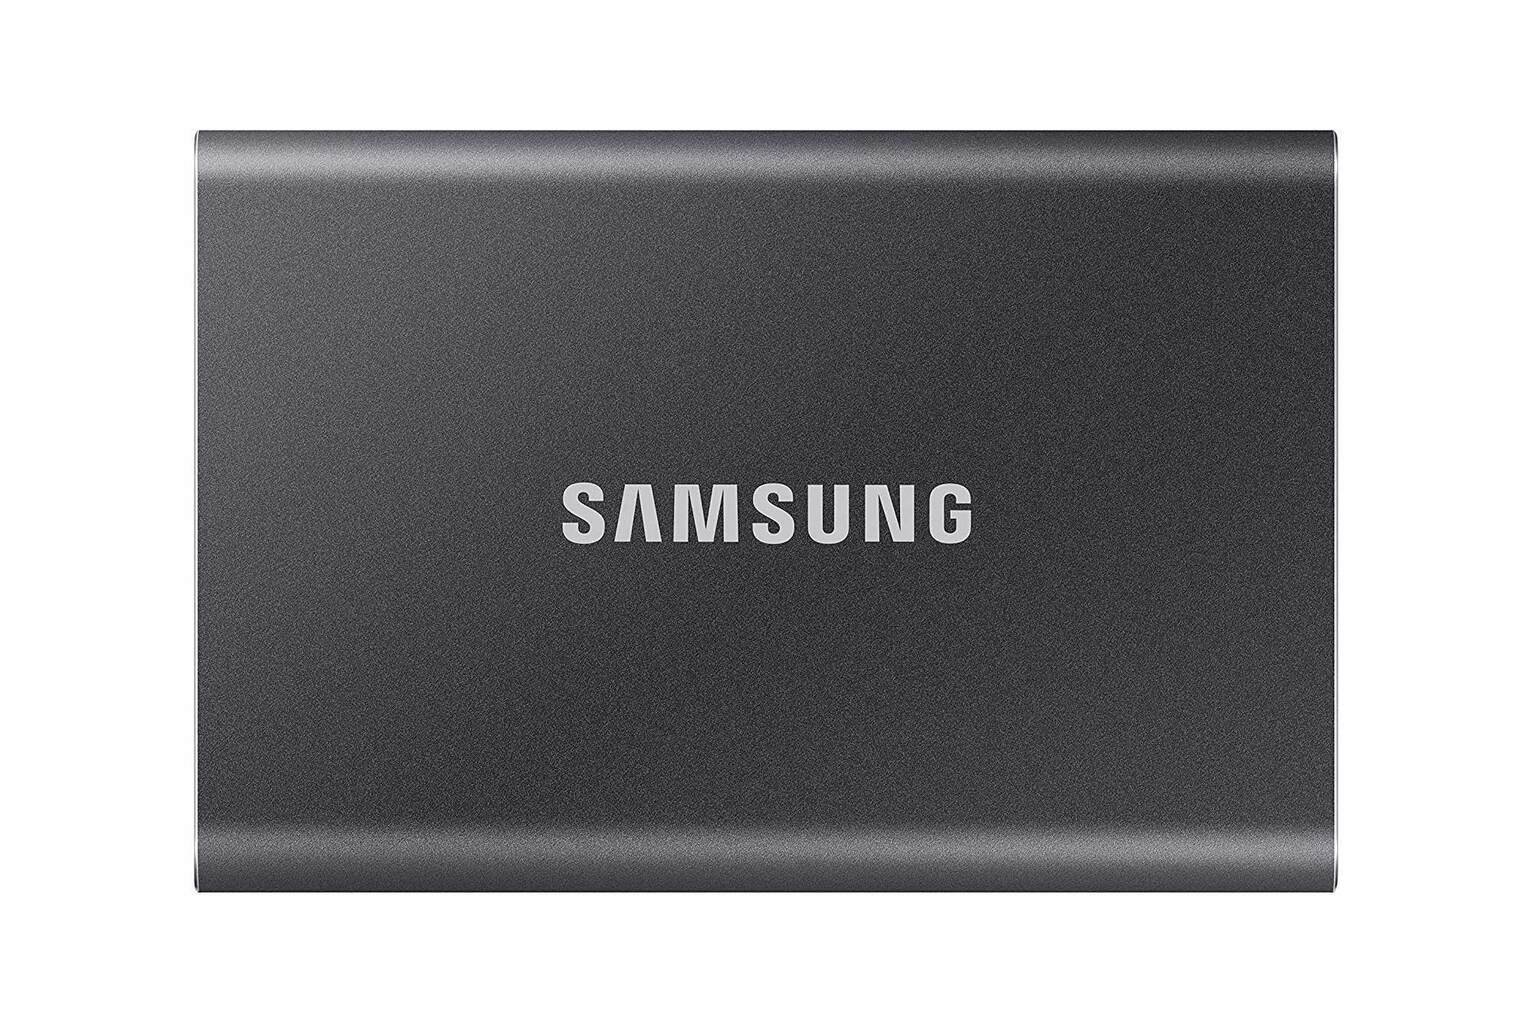 Samsung T7 500GB Portable SSD Hard Drive Review